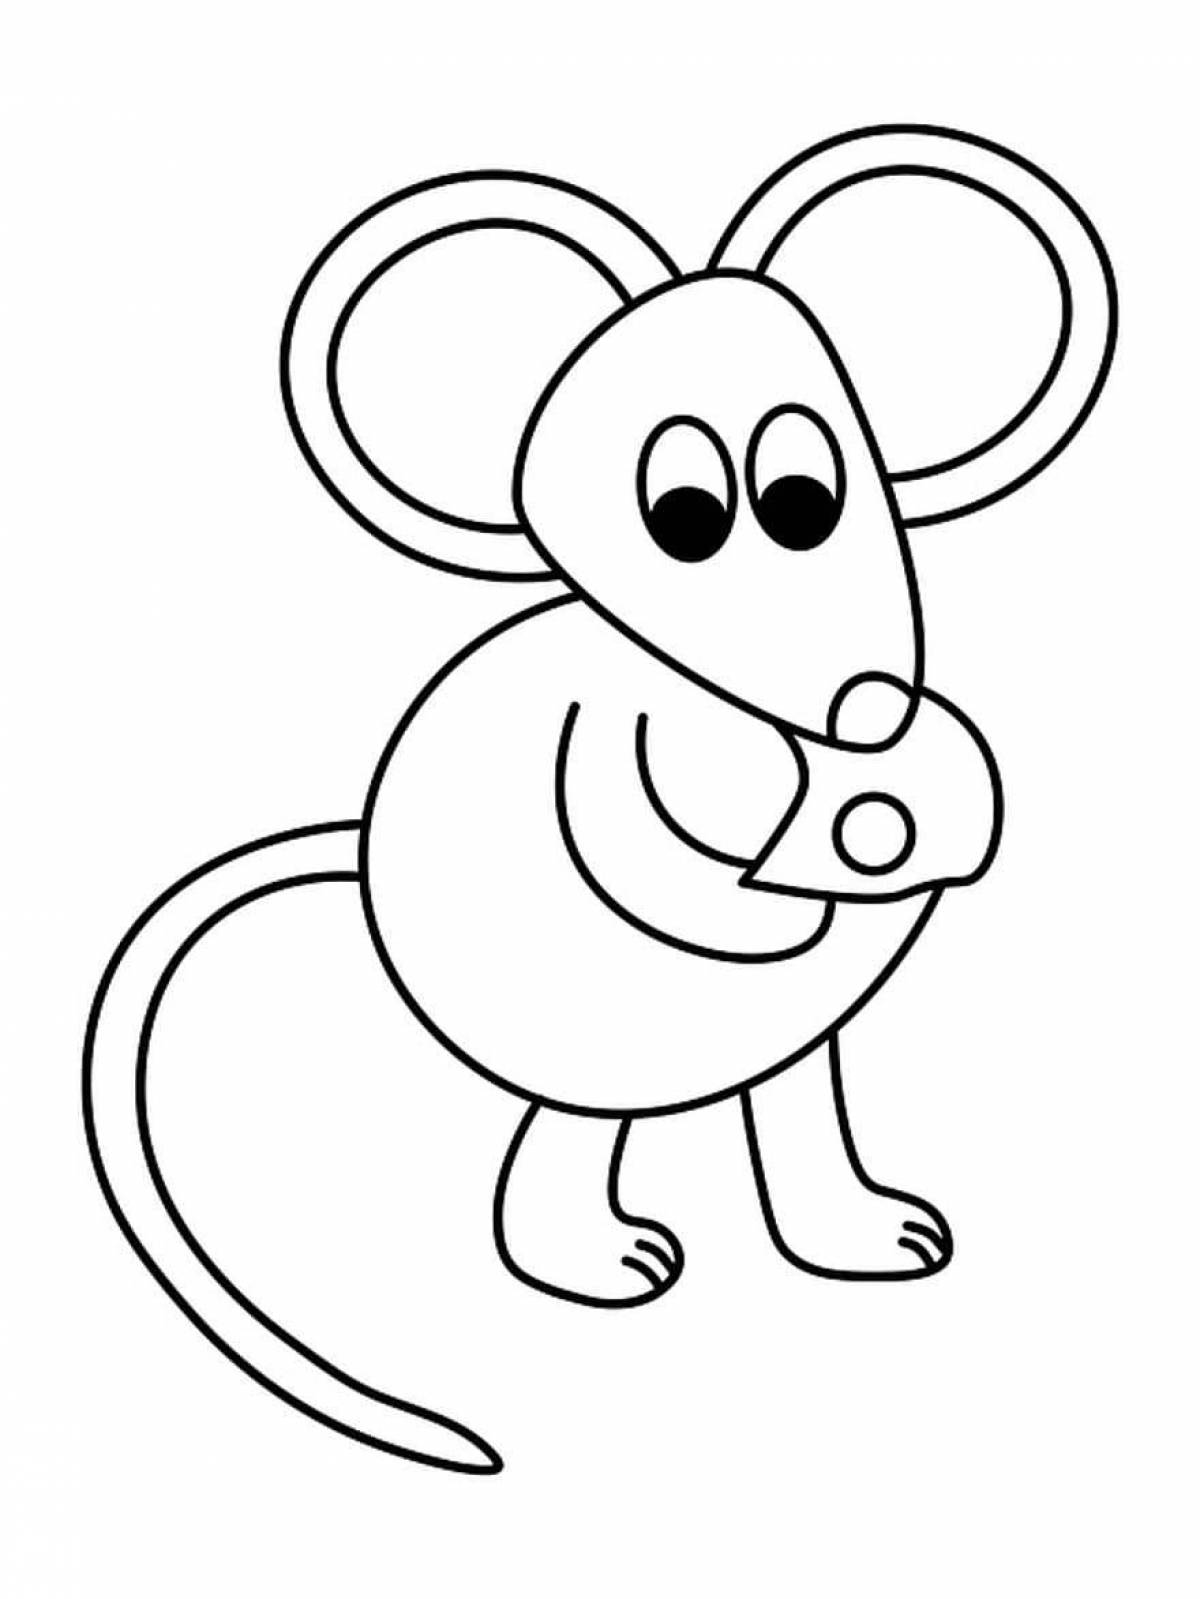 Fancy mouse coloring book for 4-5 year olds